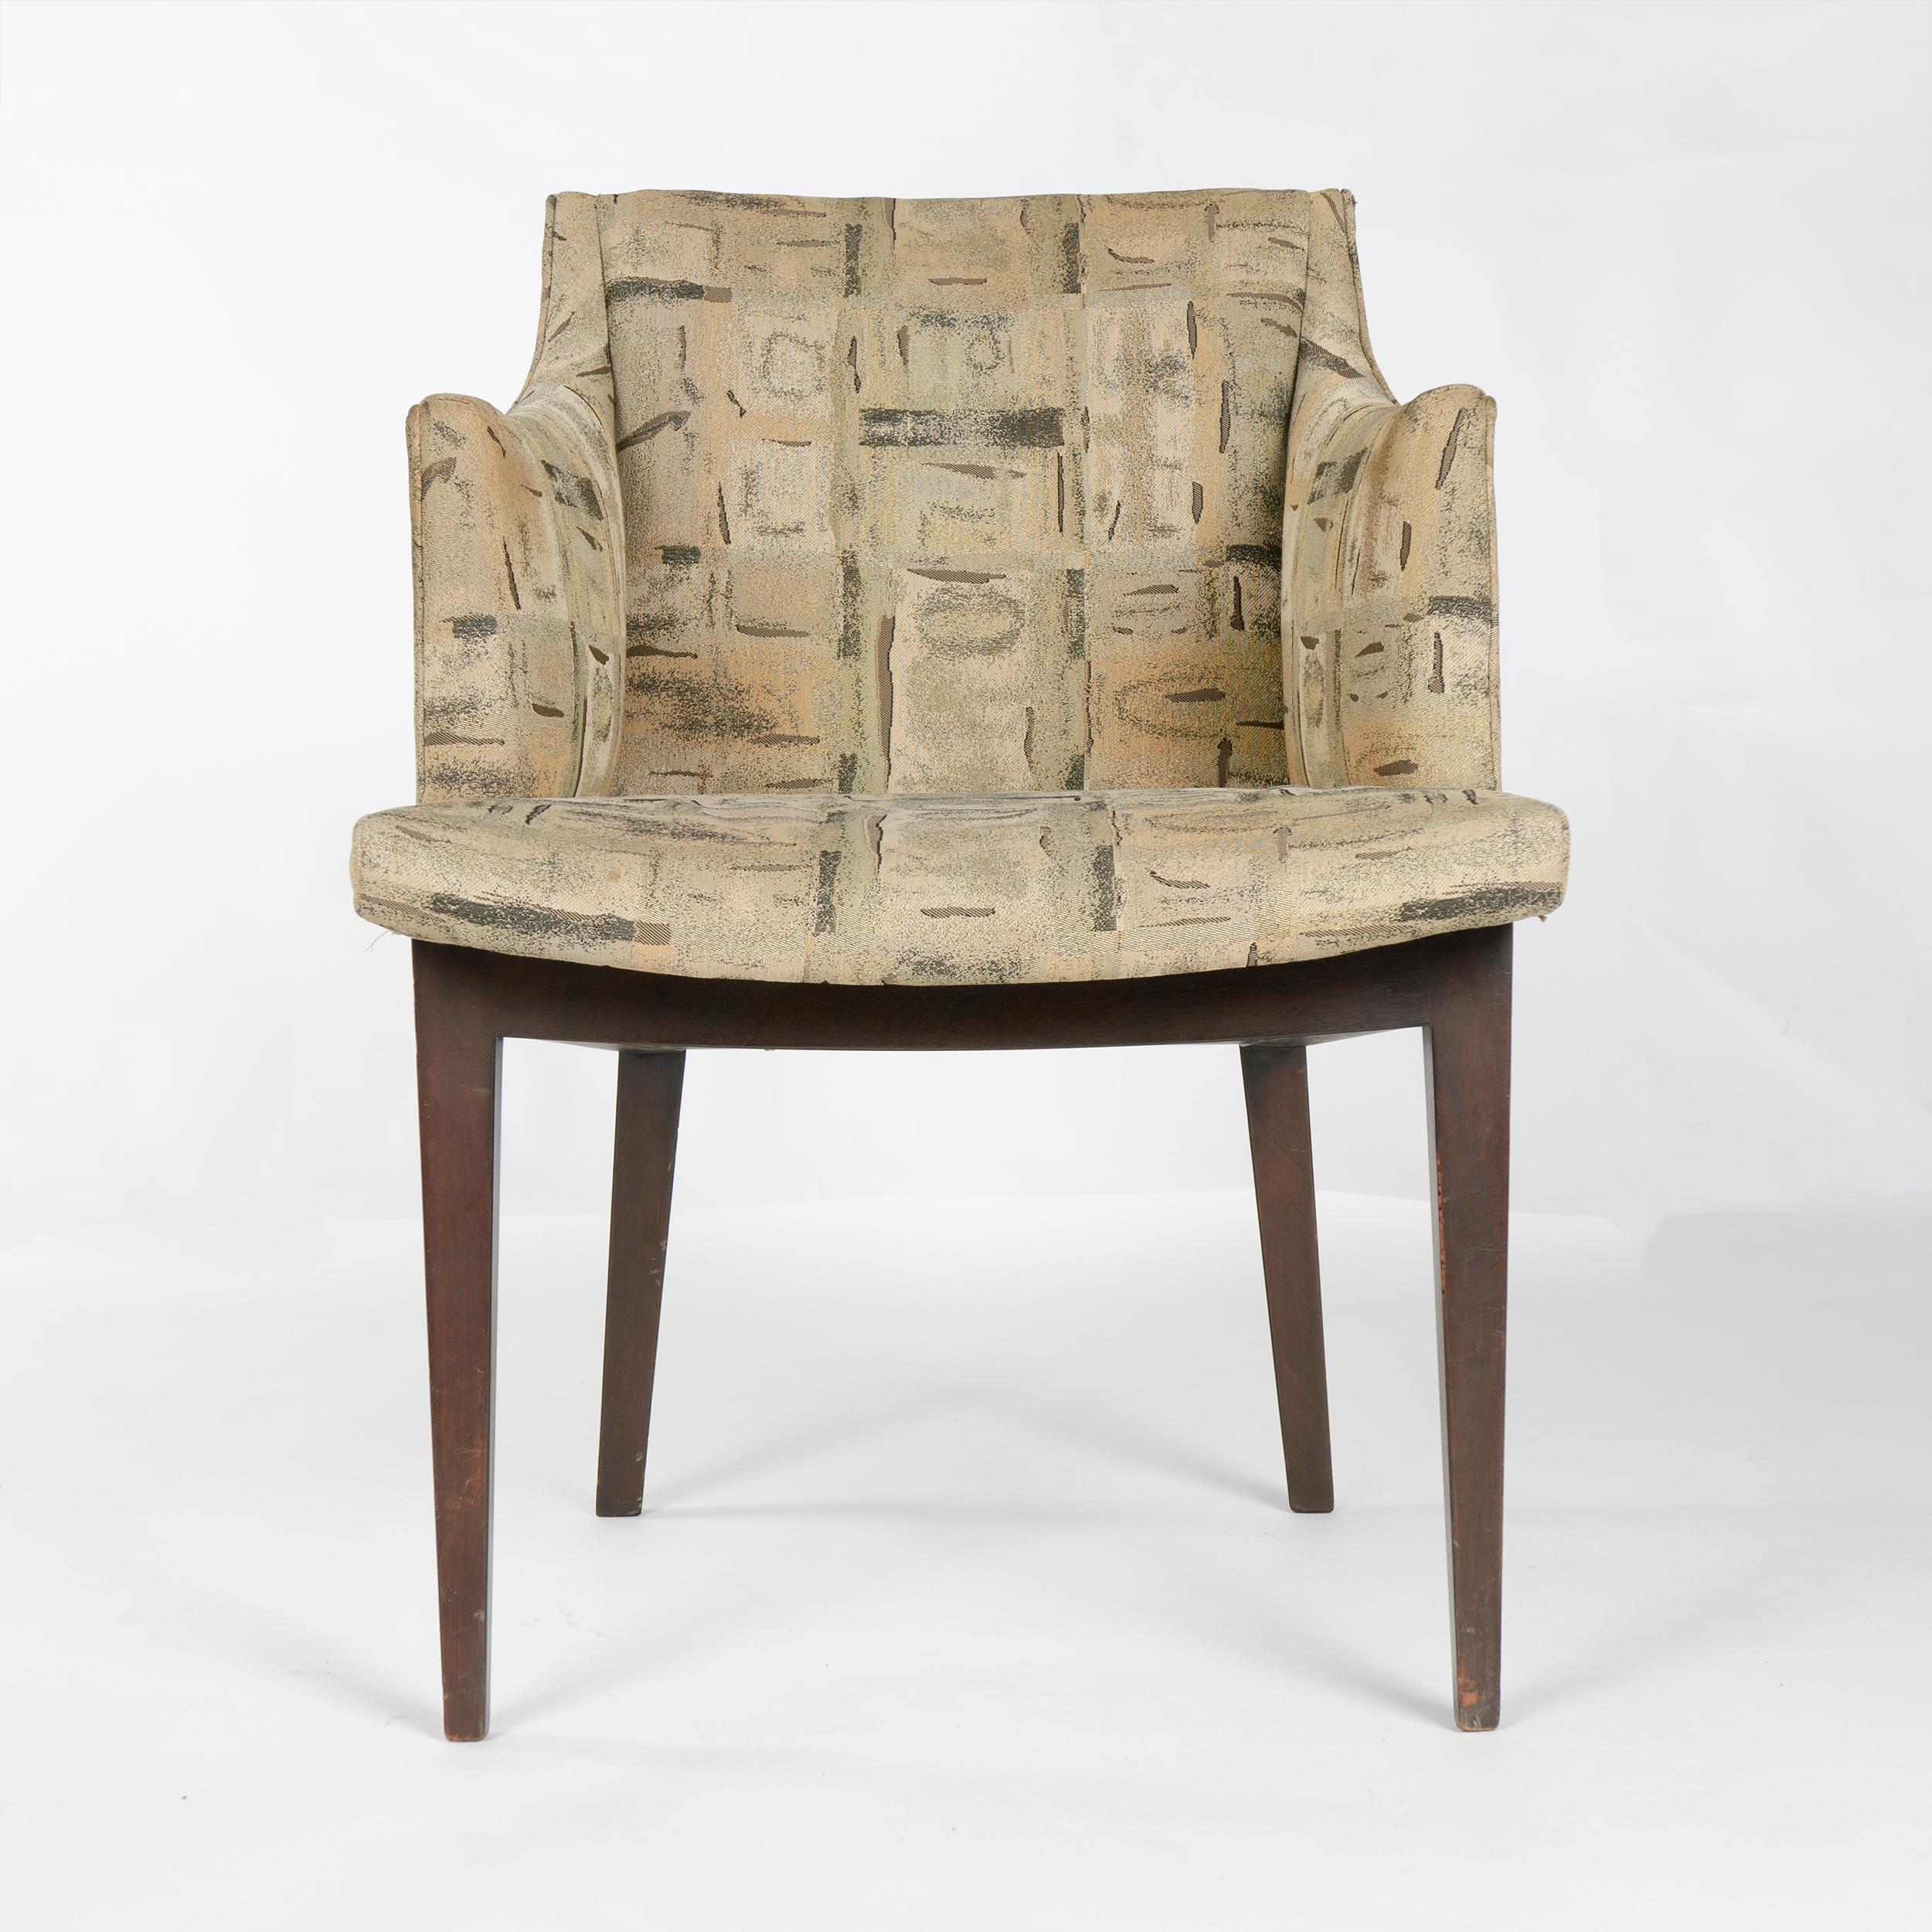 A model 5517 occasional armchair with exposed mahogany frame supporting a fully upholstered seat, back rest and arms, covered in vintage upholstery. Designed in 1954 as a component of the Hemisphere Collection, introduced in 1955 at the Chicago